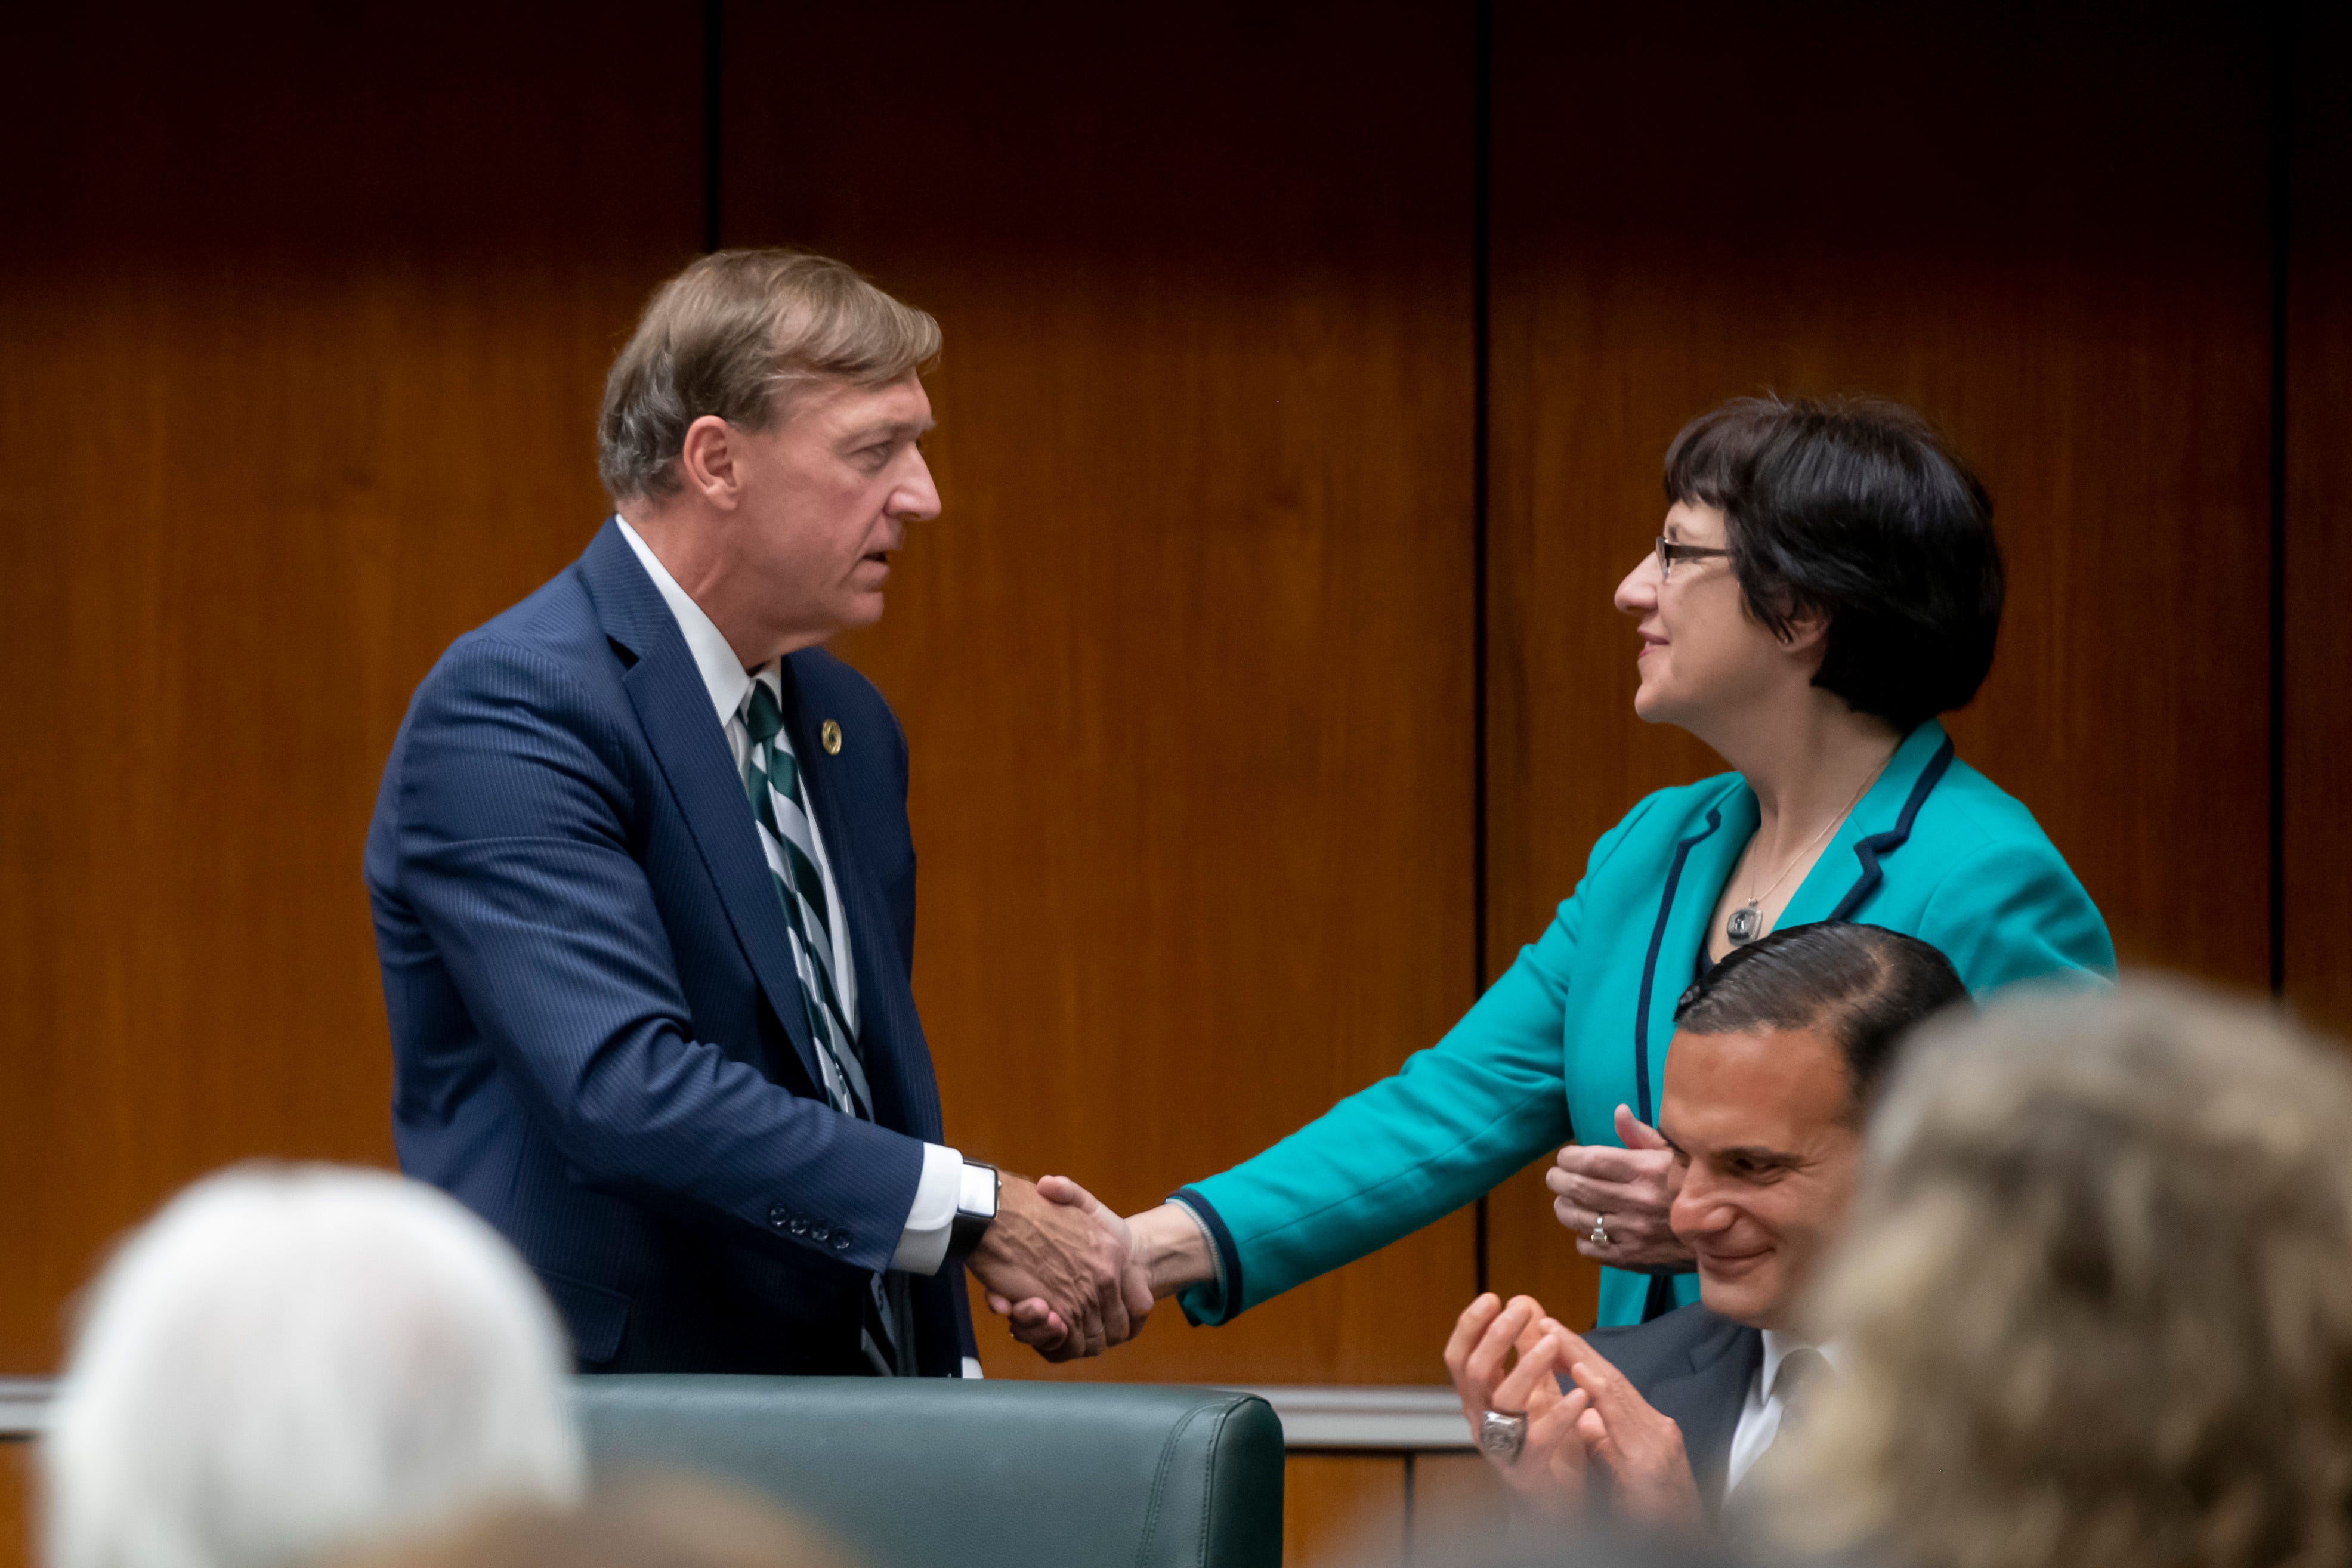 Samuel Stanley Jr. and Dianne Byrum, chair of the board of trustees, shake hands after the board voted to elect him Michigan State University's 21st president, May 28, 2019.